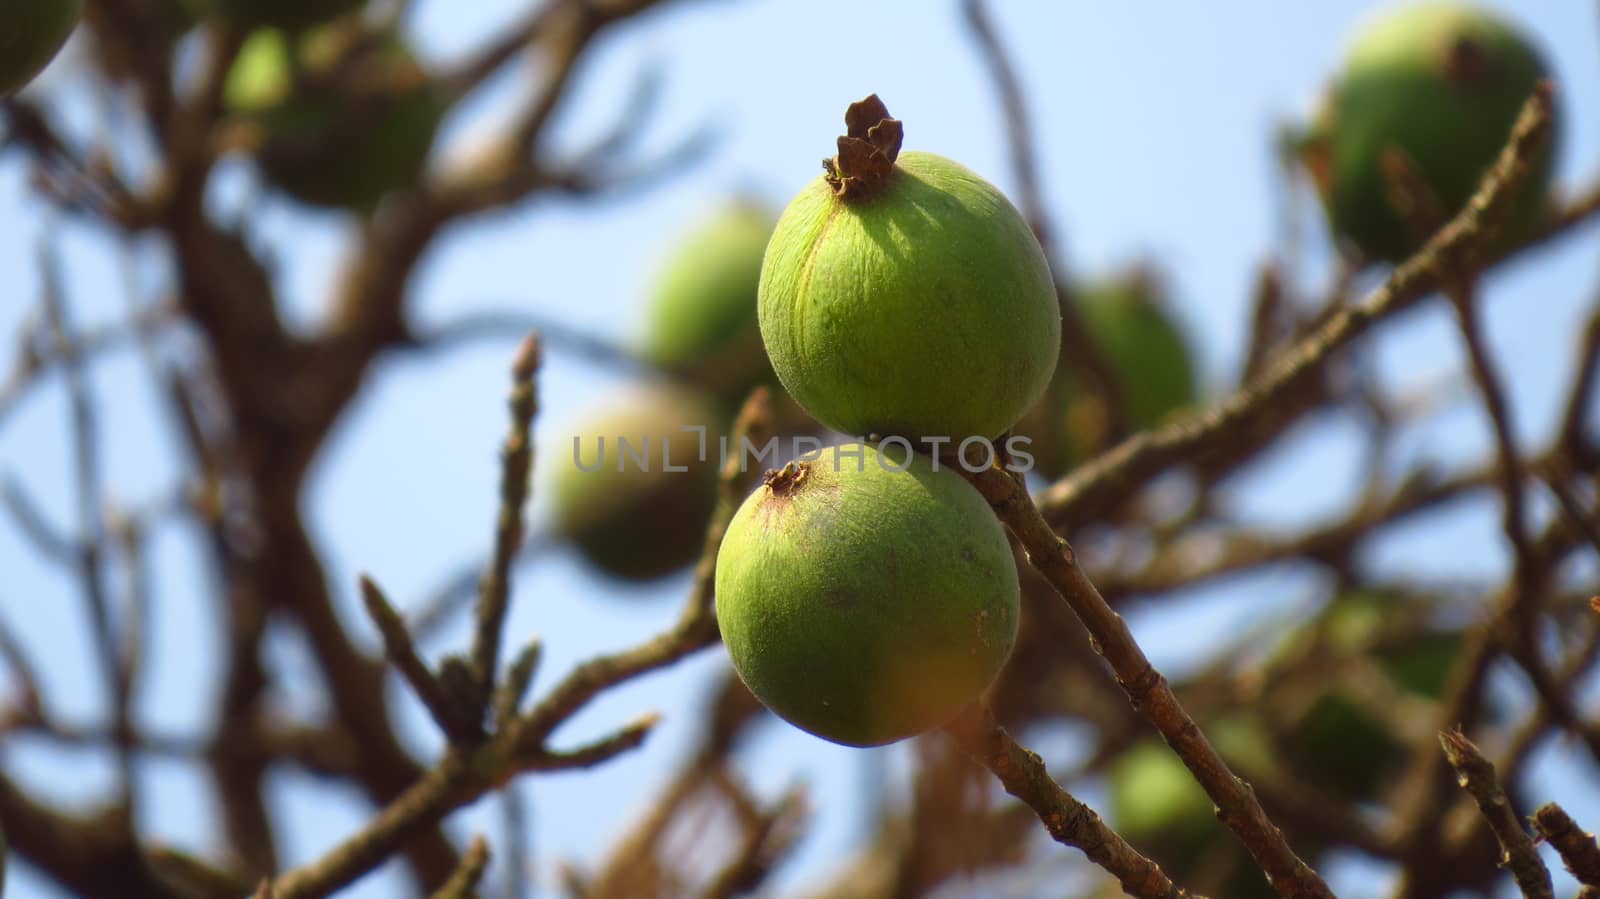 Strange fruits green and round in shape on a dry tree in the Indian tropics.                               